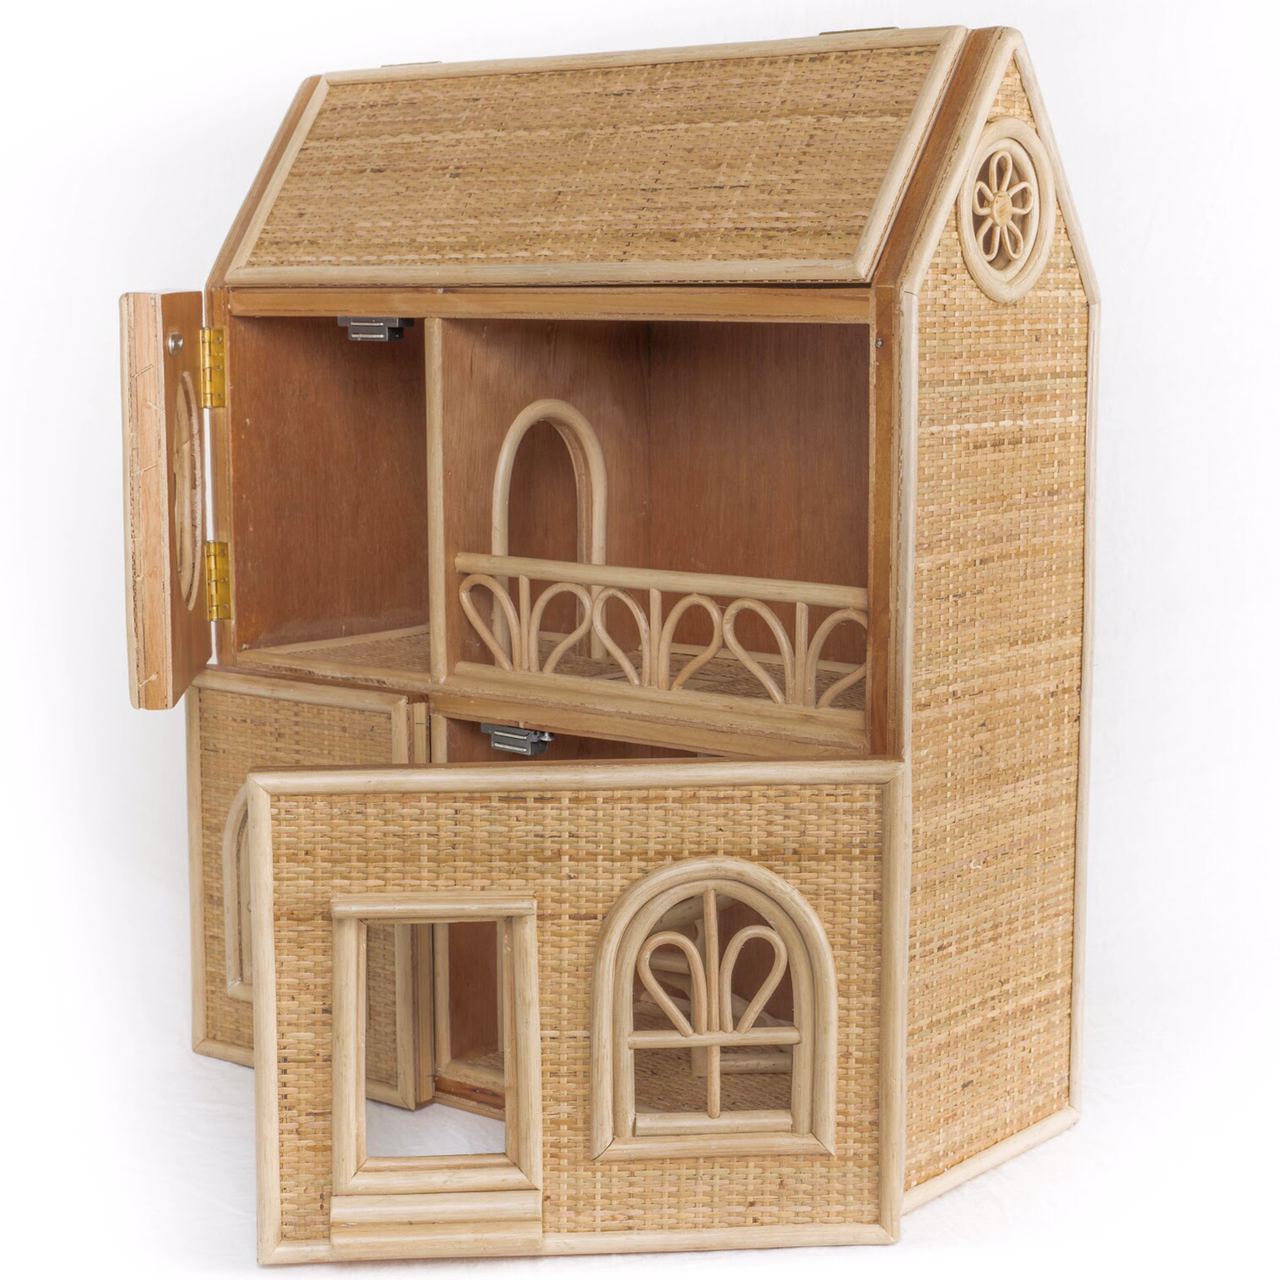 Aria's Victorian Dollhouse | Shop Rattan Toys and Furniture Online | Kathy's Cove